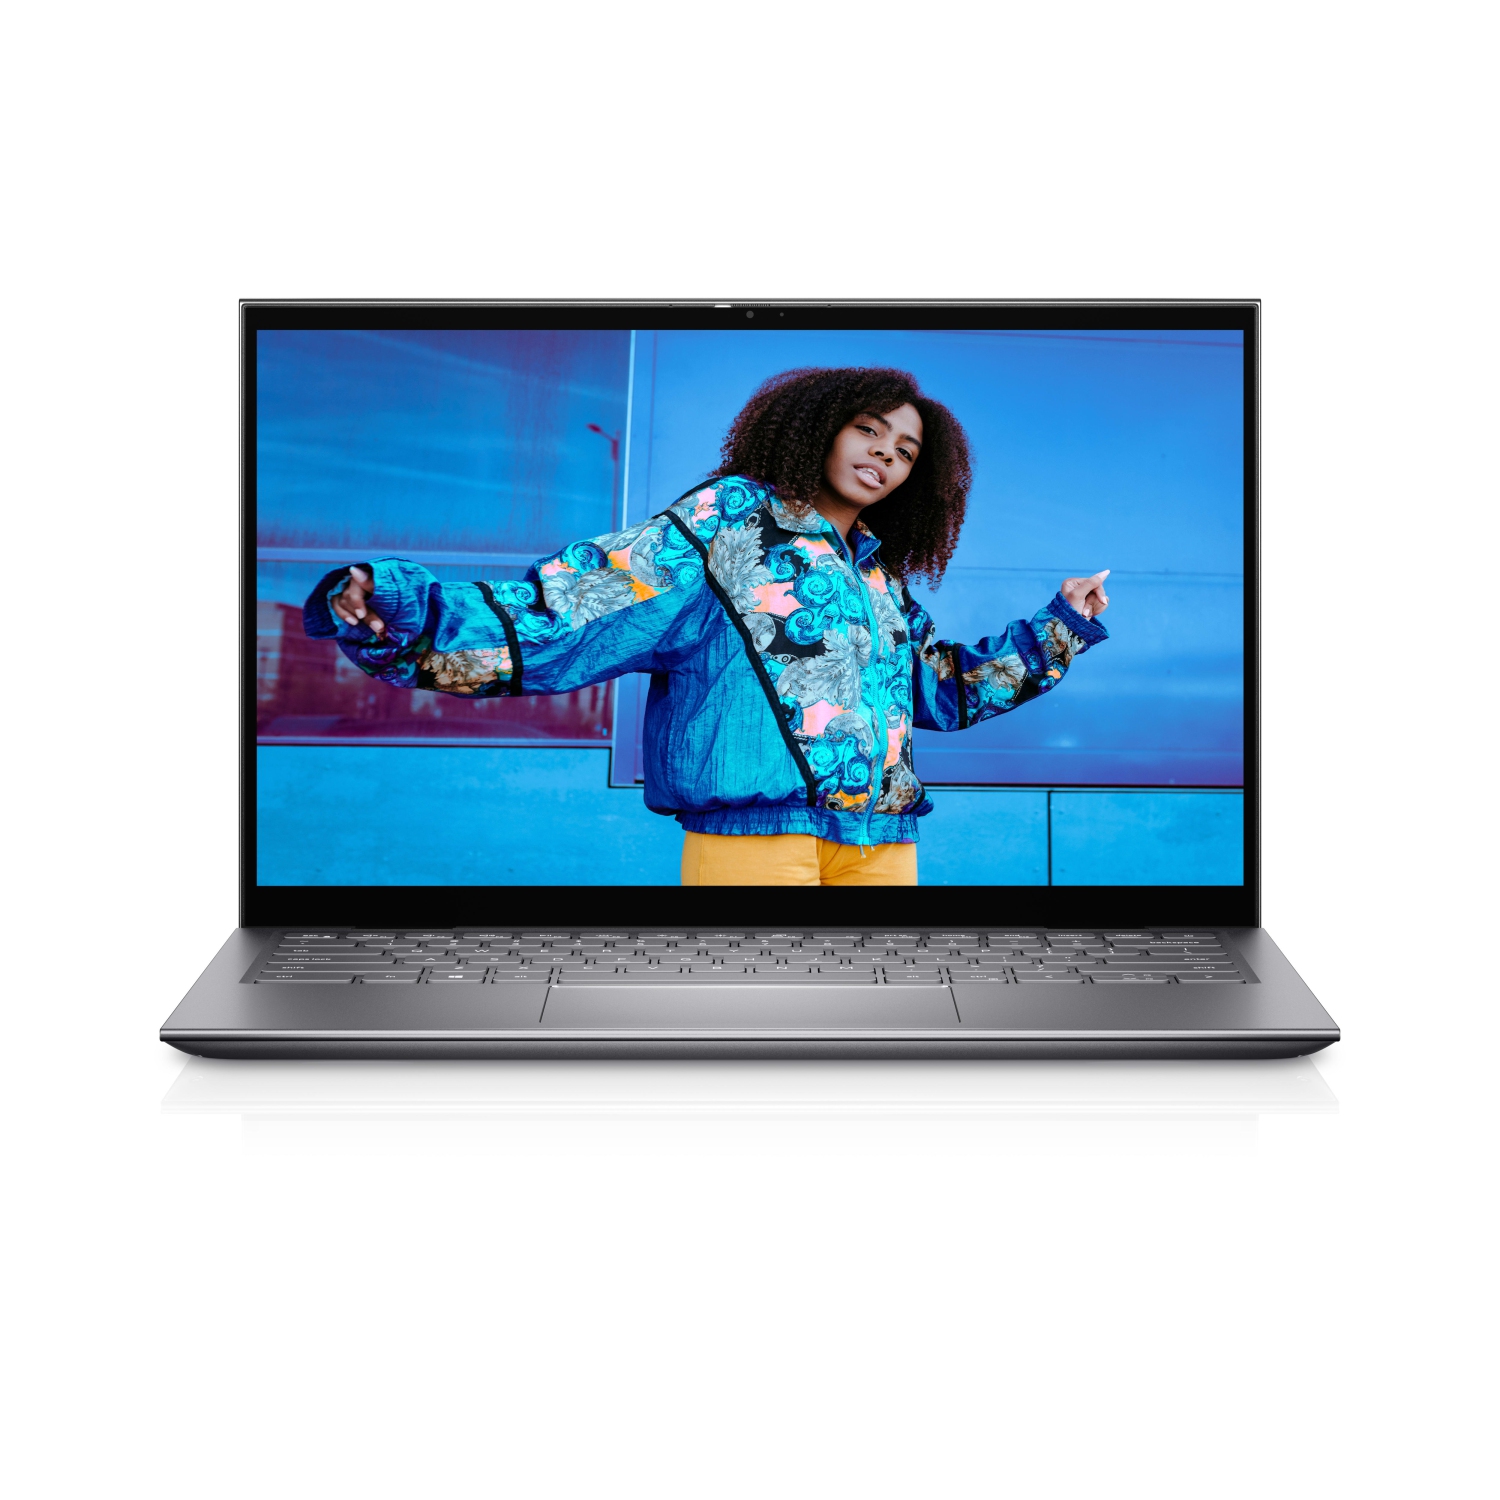 Refurbished (Excellent) – Dell Inspiron 5410 2-in-1 (2021) | 14" FHD Touch | Core i5 - 8TB SSD - 32GB RAM | 4 Cores @ 4.2 GHz - 11th Gen CPU